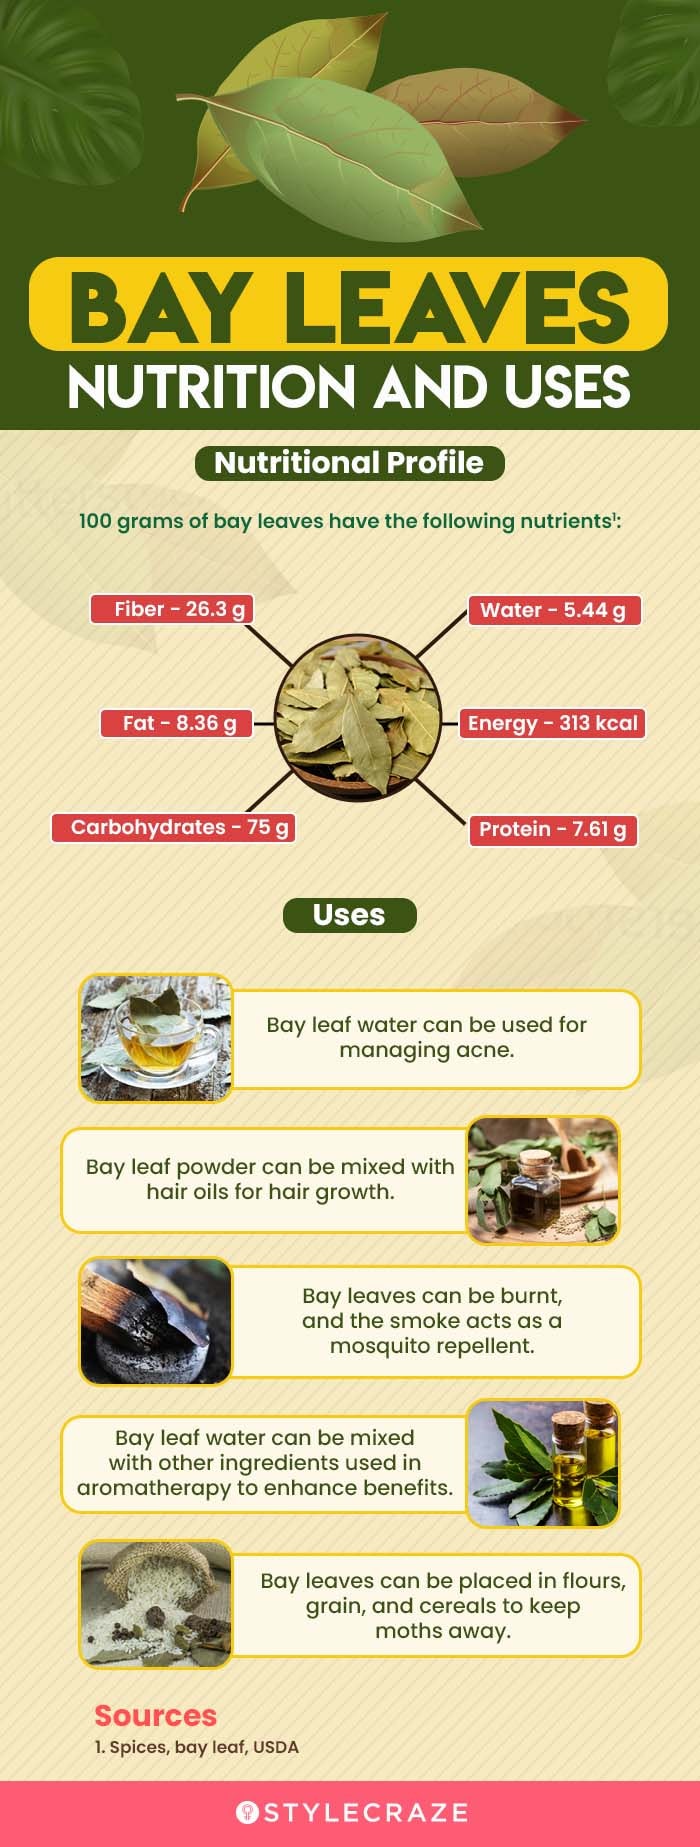 bay leaves nutrition and uses [infographic]